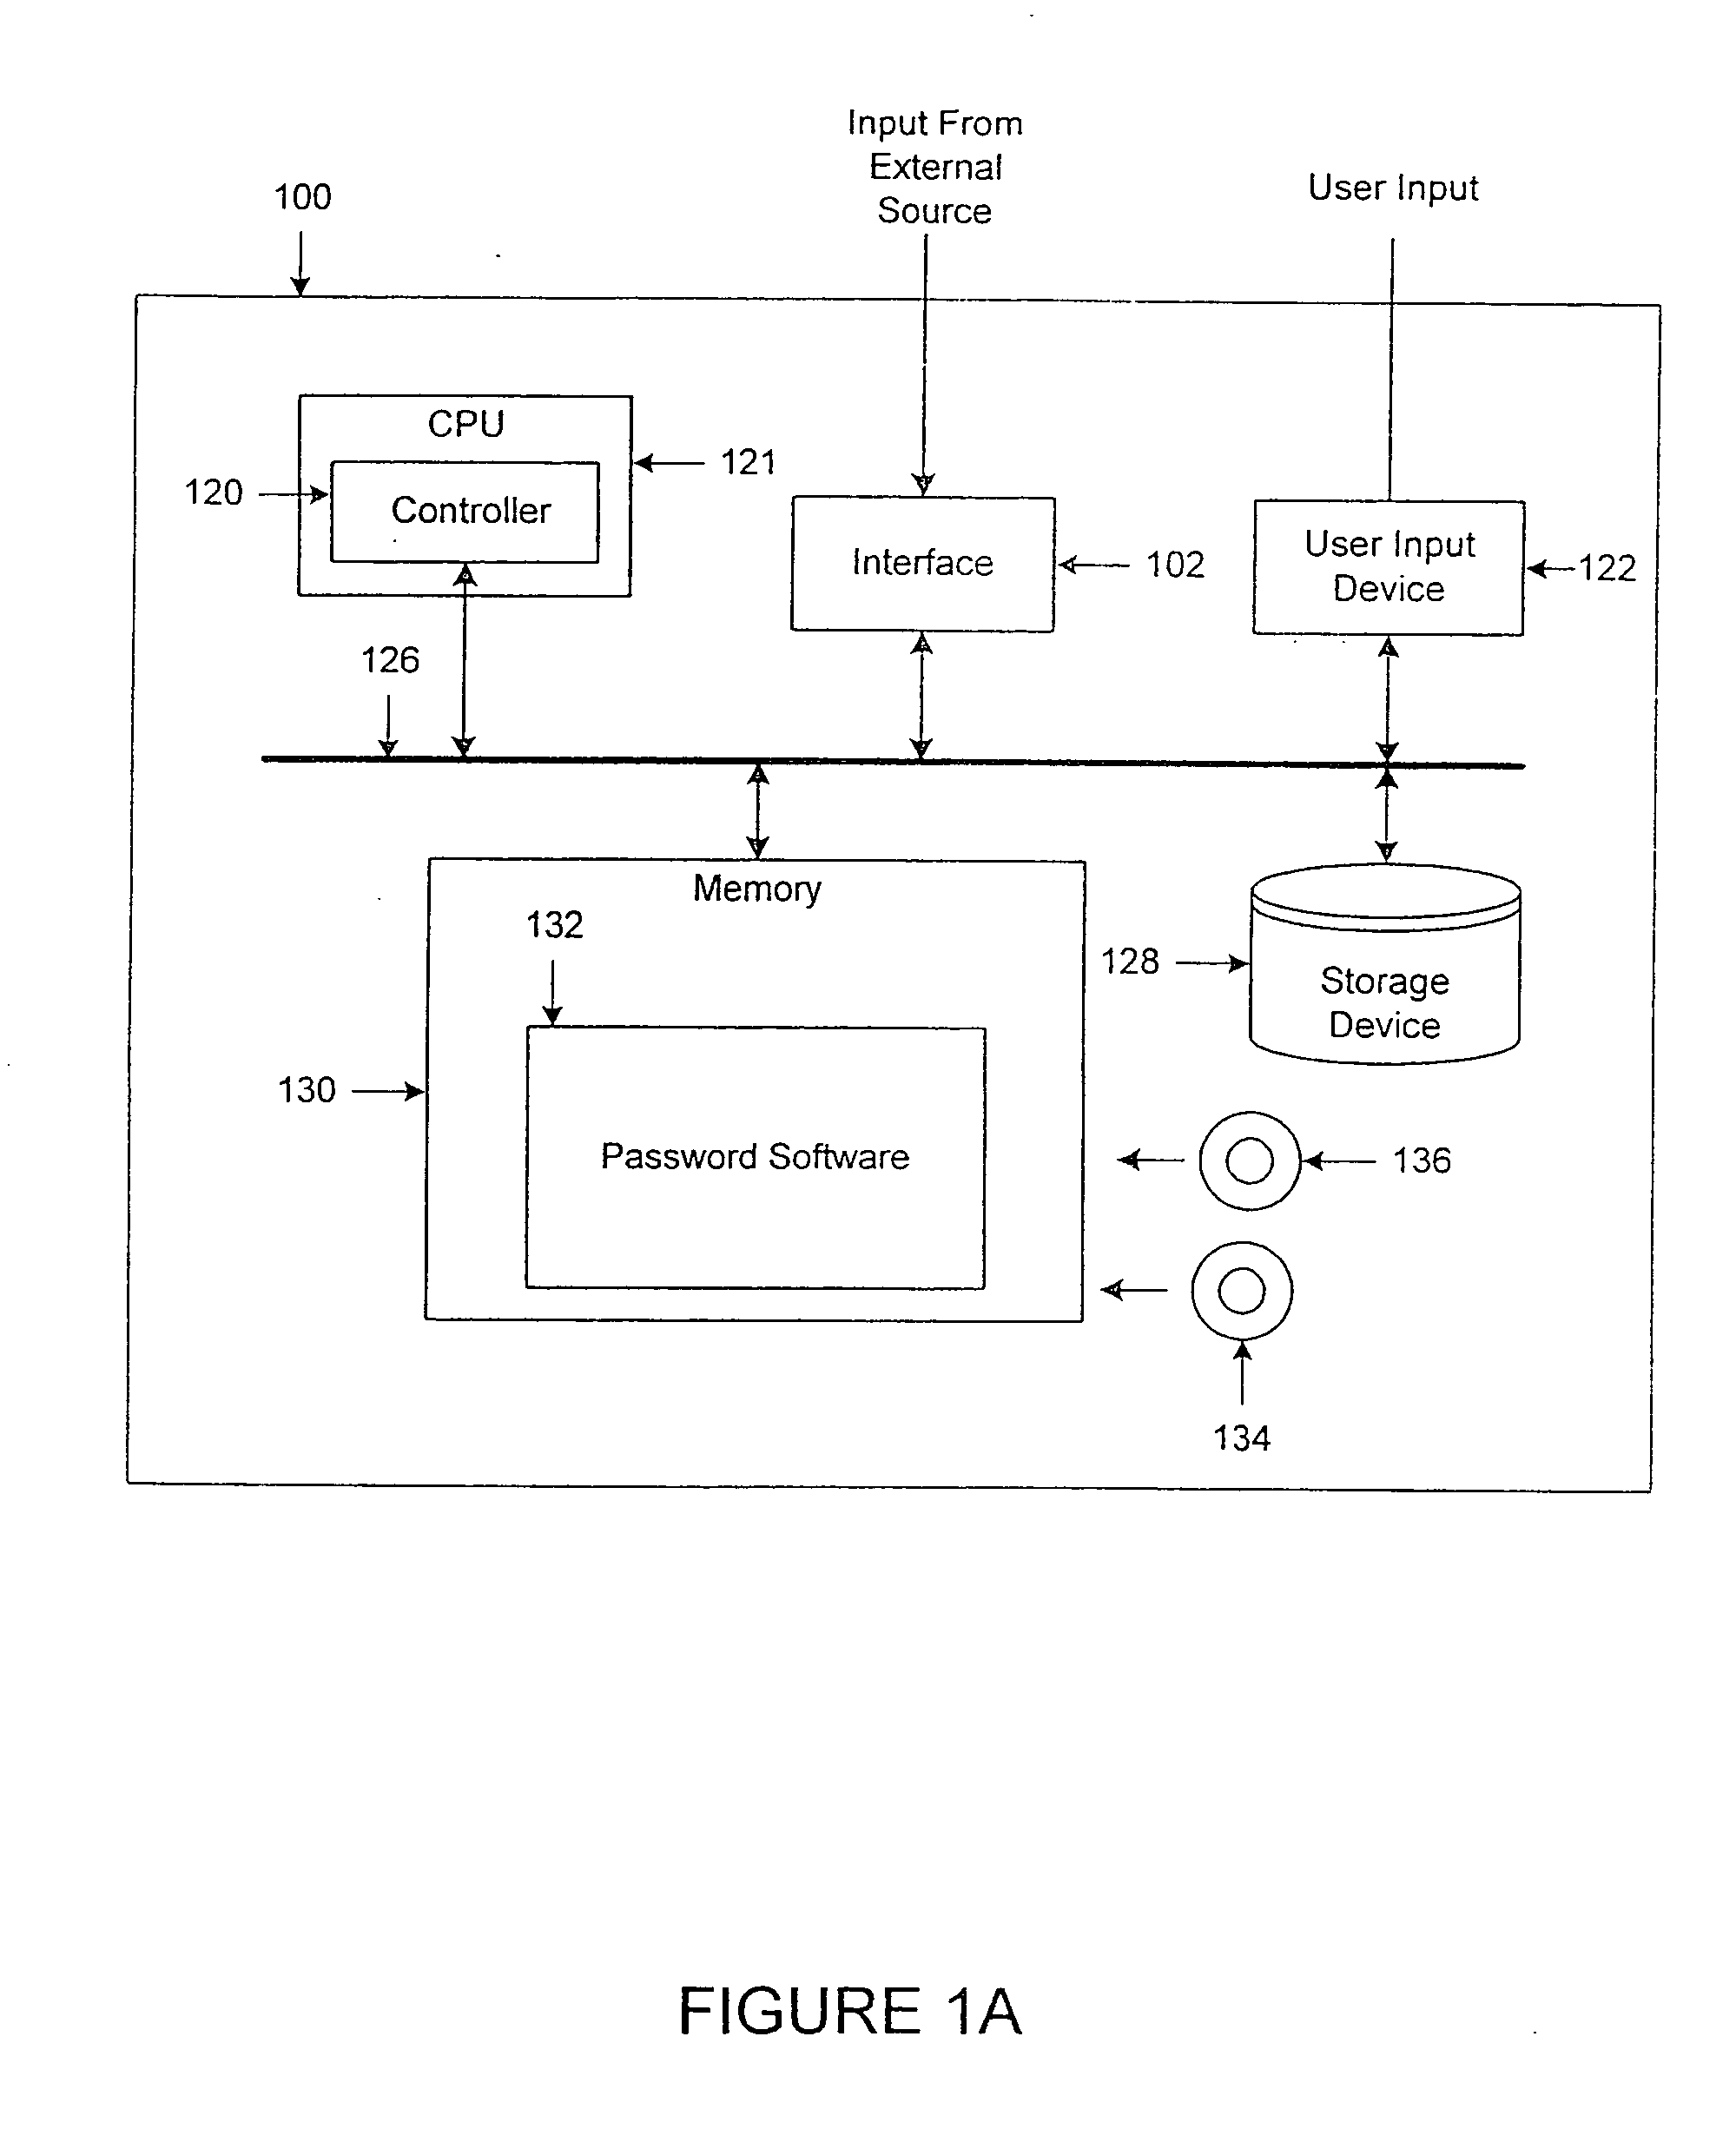 System and method providing secure access to a computer system